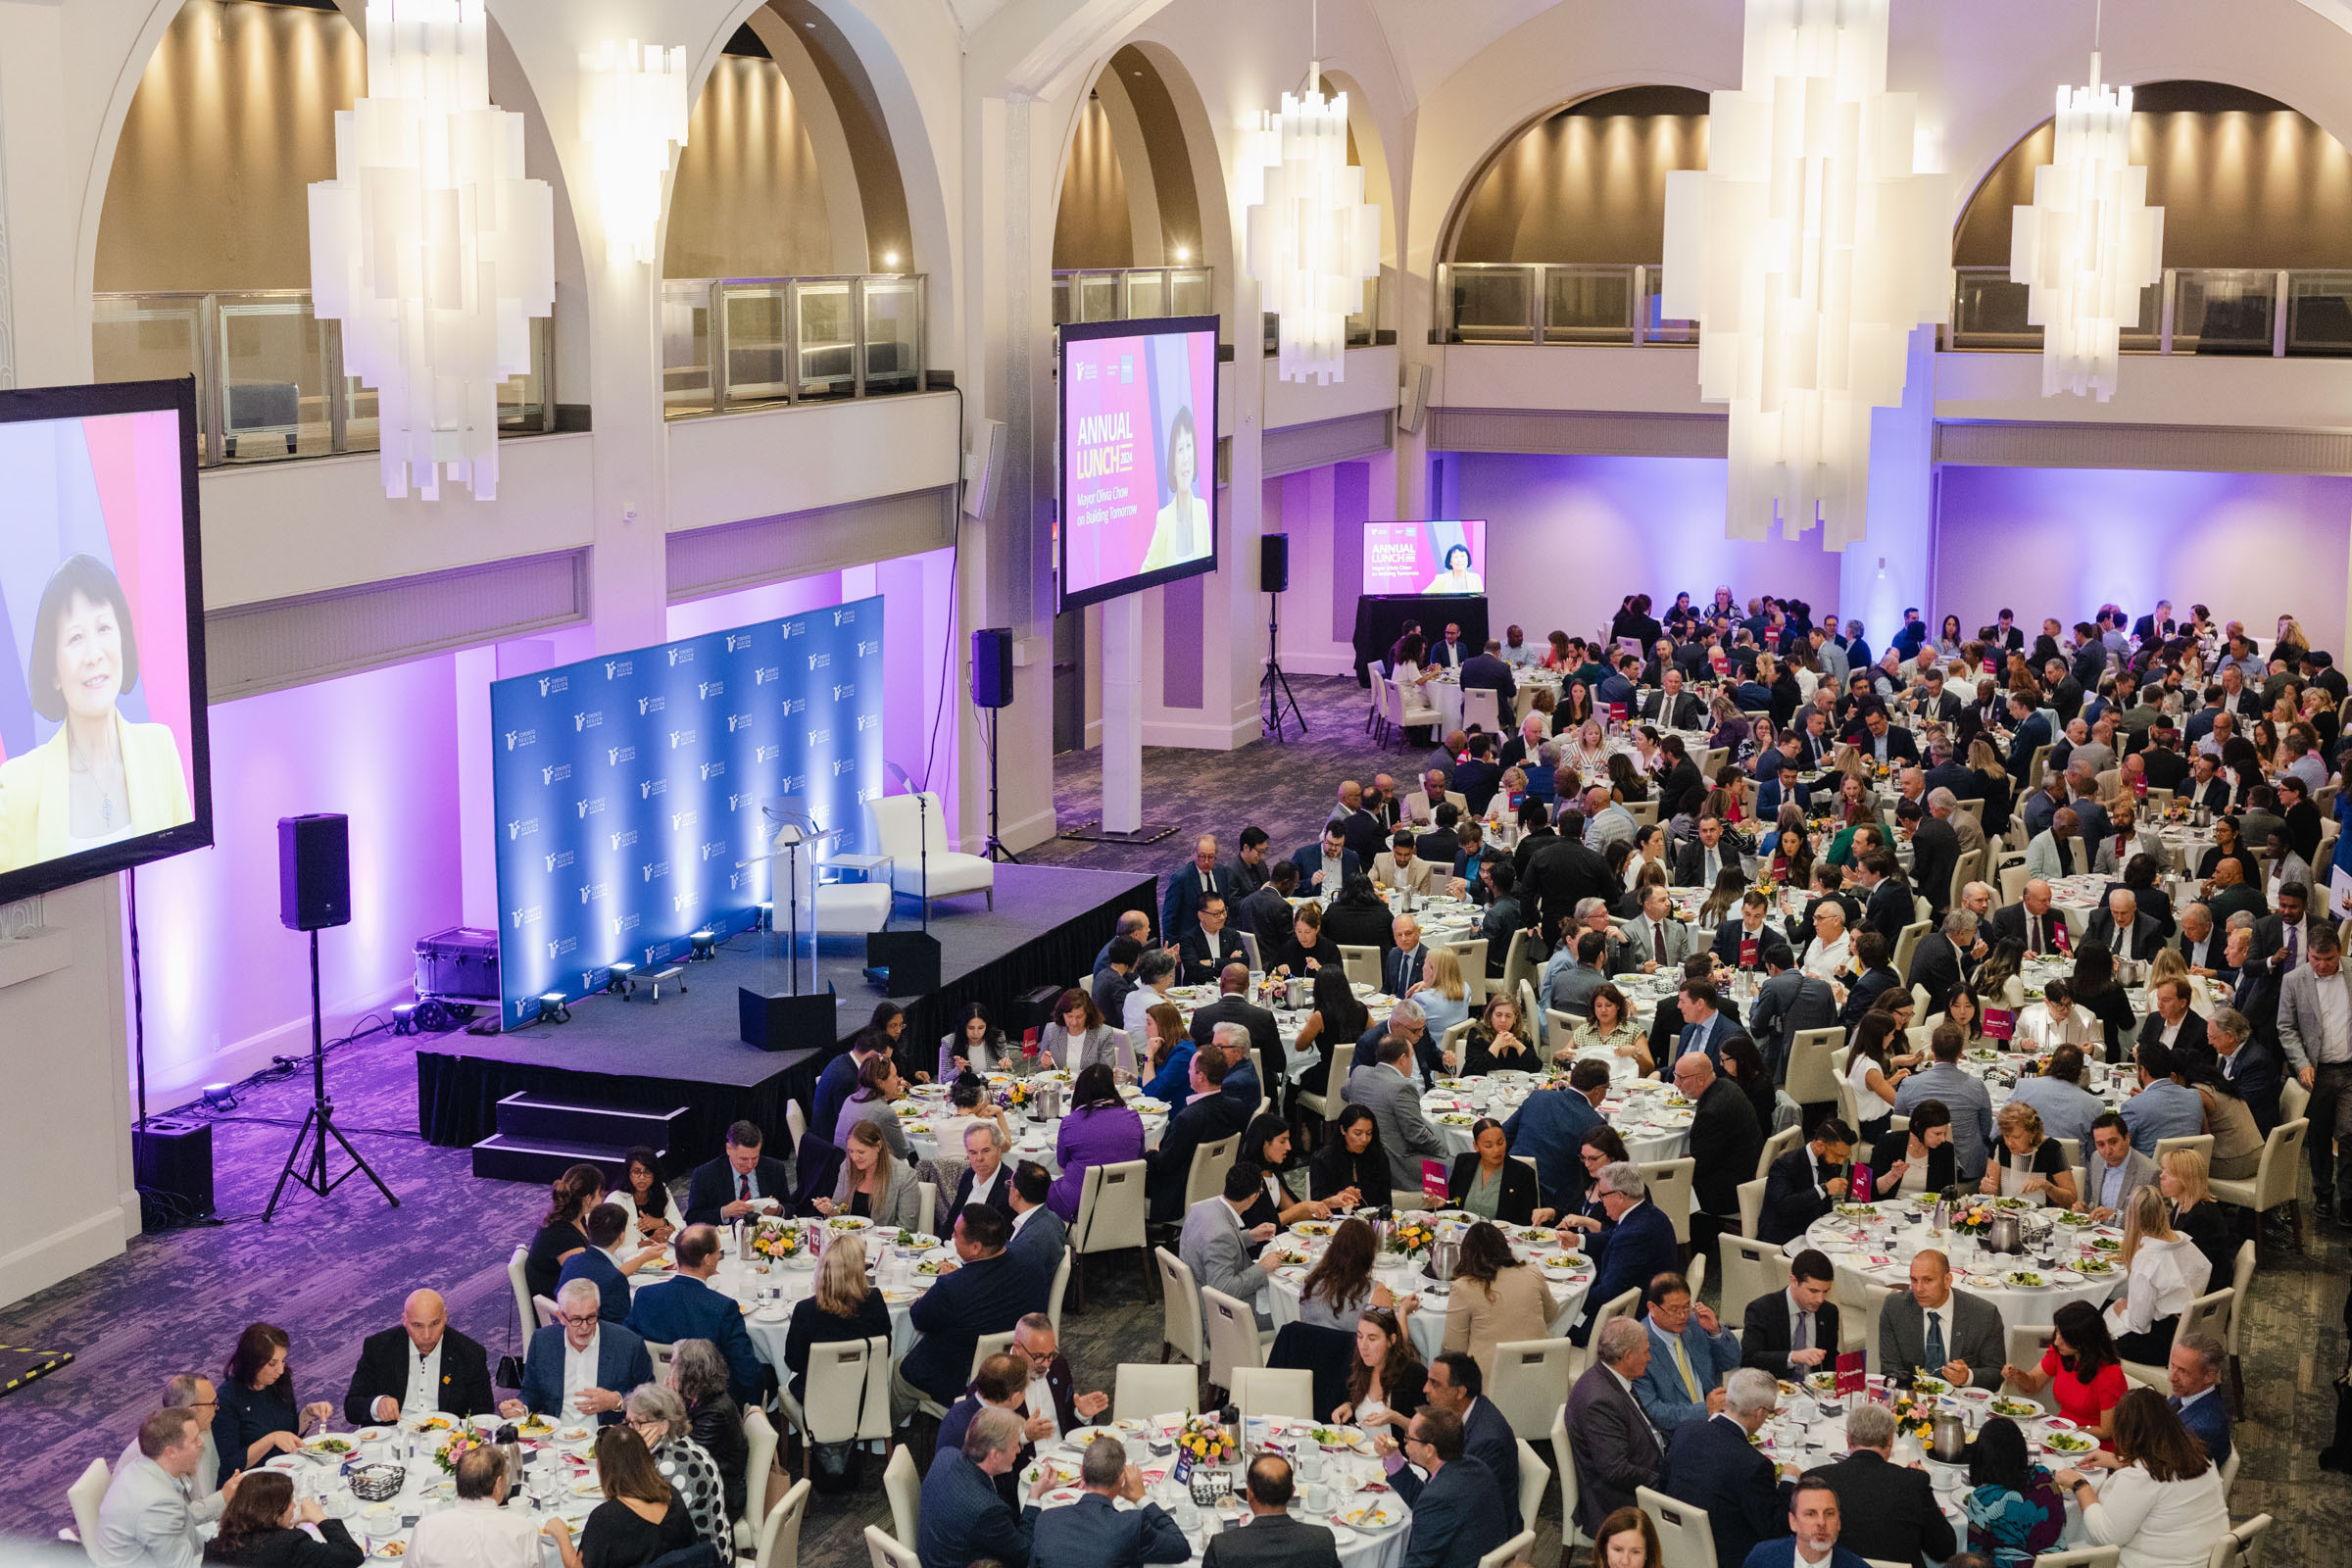 A large group of people attend a formal event in a spacious hall. Tables are set with food, and multiple screens display a speaker, while event photography captures candid moments throughout the evening.